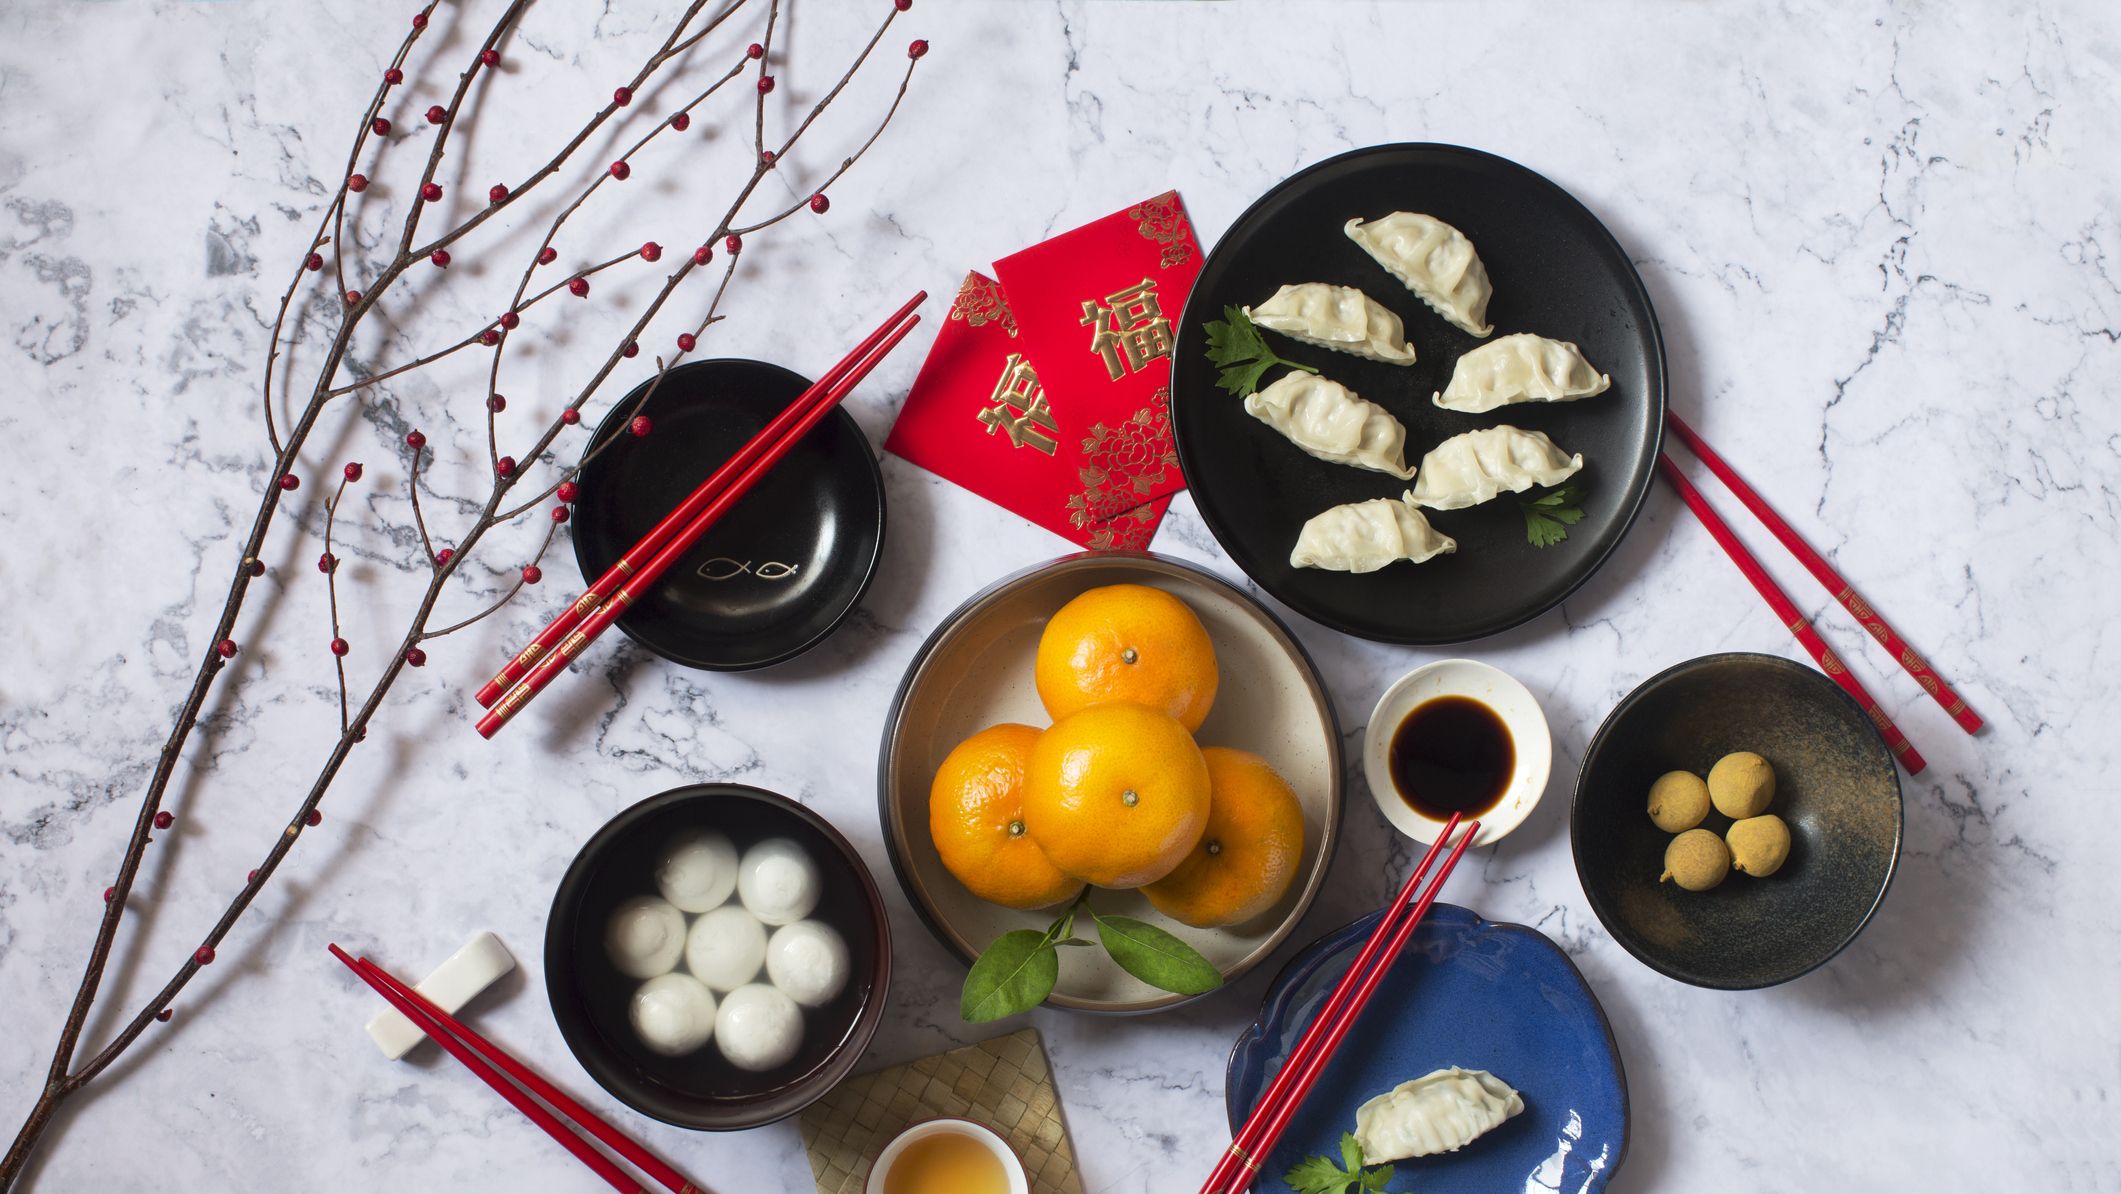 11 Traditional Lunar New Year Foods for 2023 - Year of the Rabbit